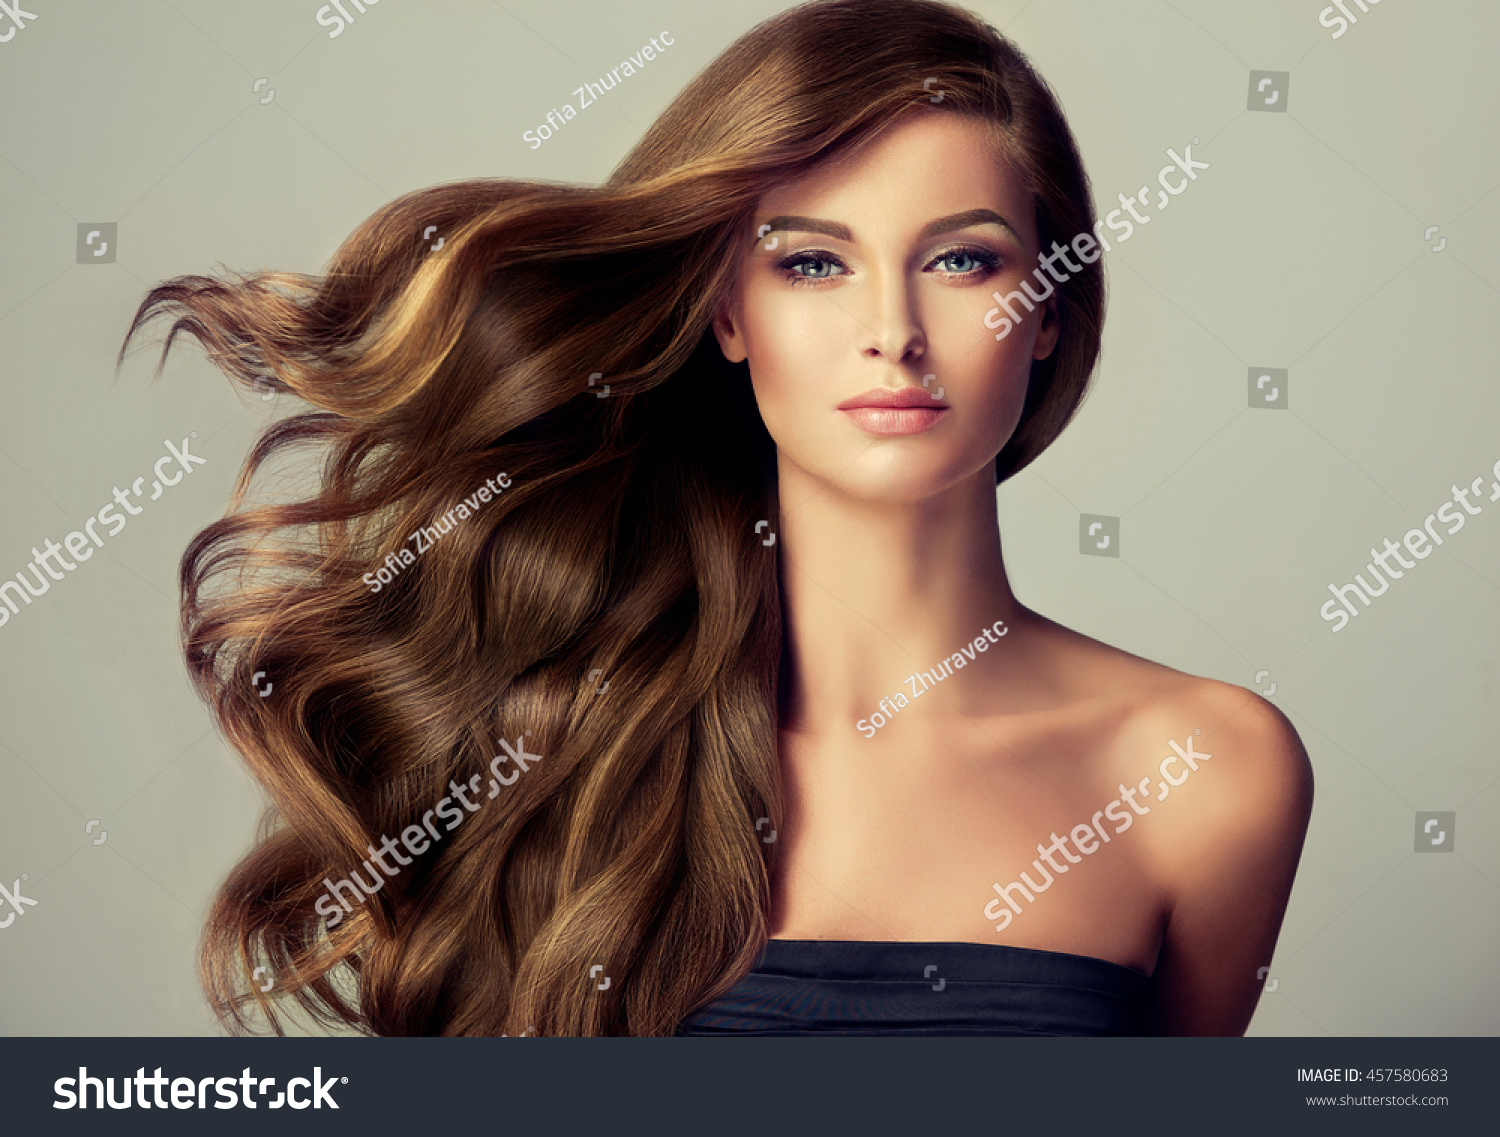 Brunette  girl with long  and   shiny wavy hair .  Beautiful  model with curly hairstyle . #457580683